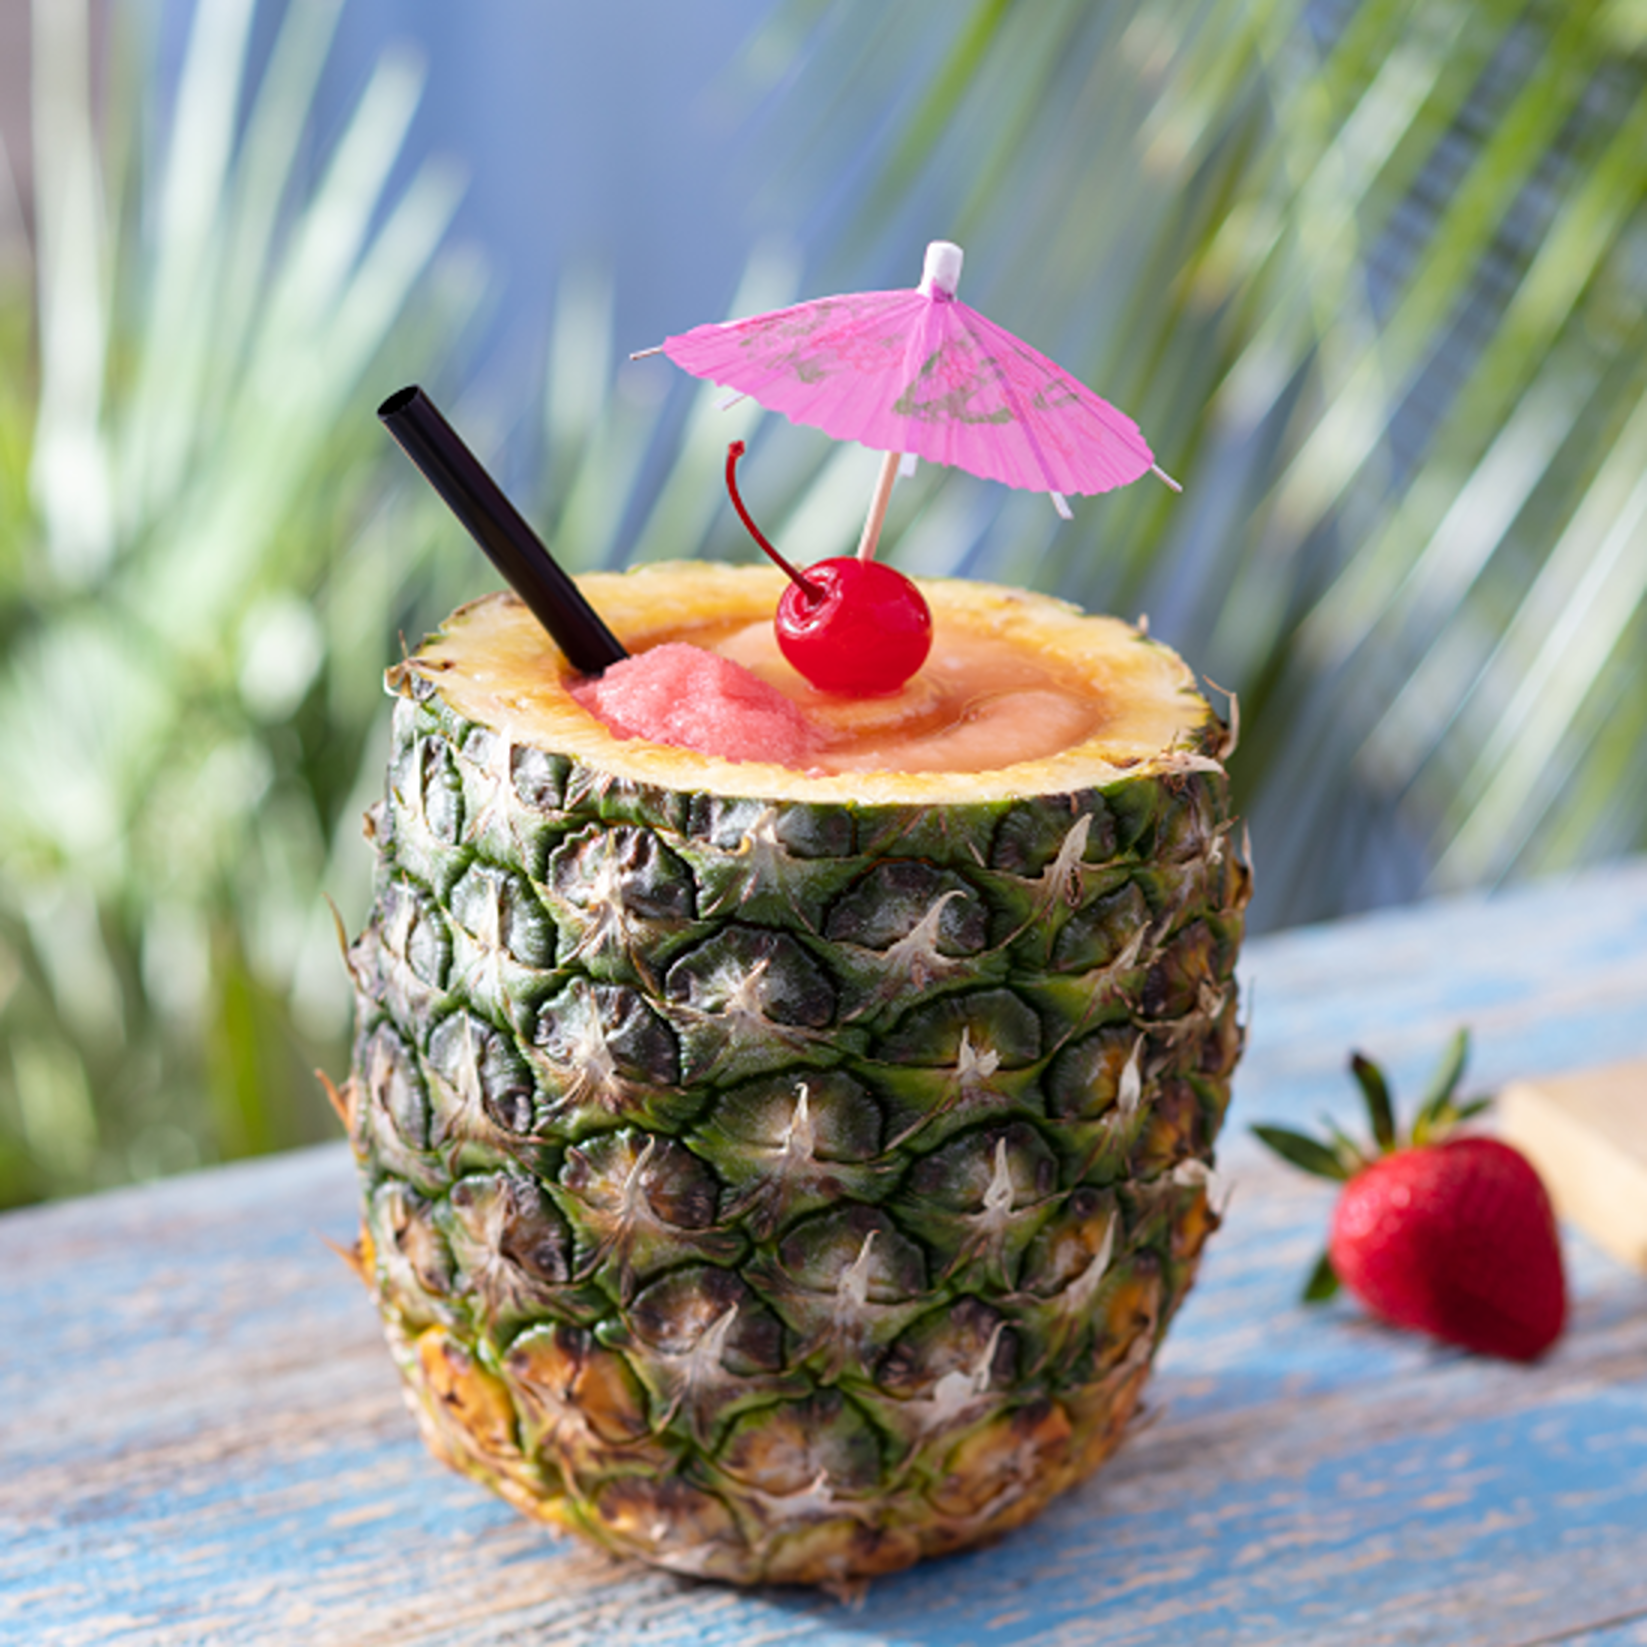 Ultimate Pineapple – With spiced rum, Coco López & Bacardi Black Rum swirled with strawberry ice and served in a freshly cut pineapple.